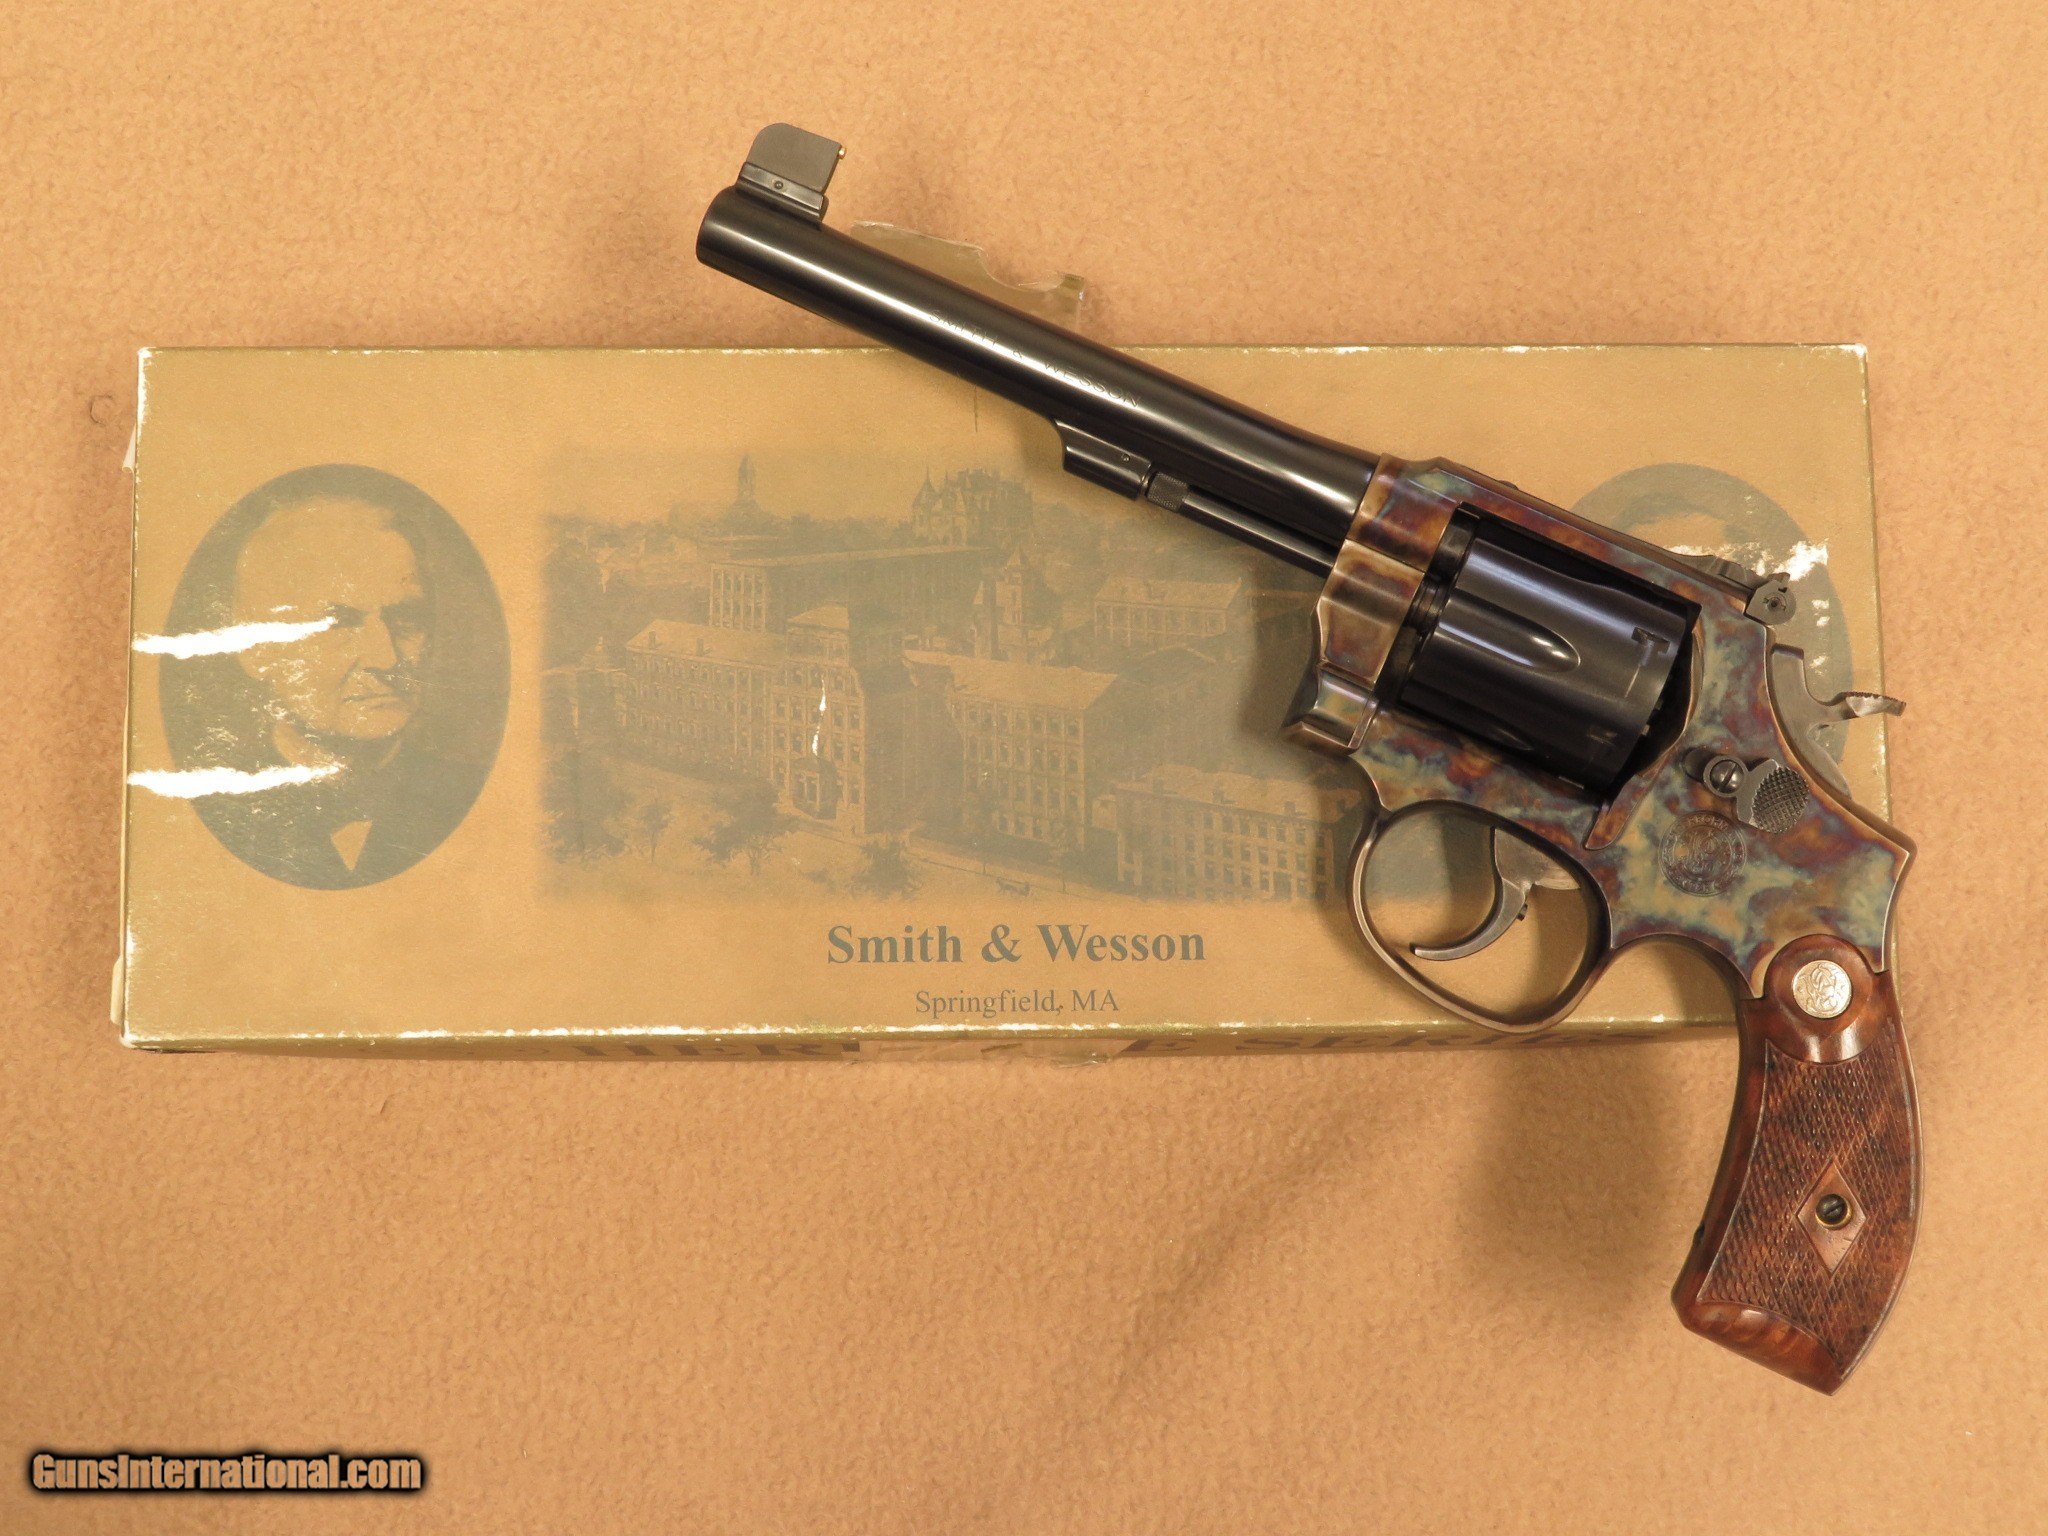 Smith & Wesson Heritage Series 